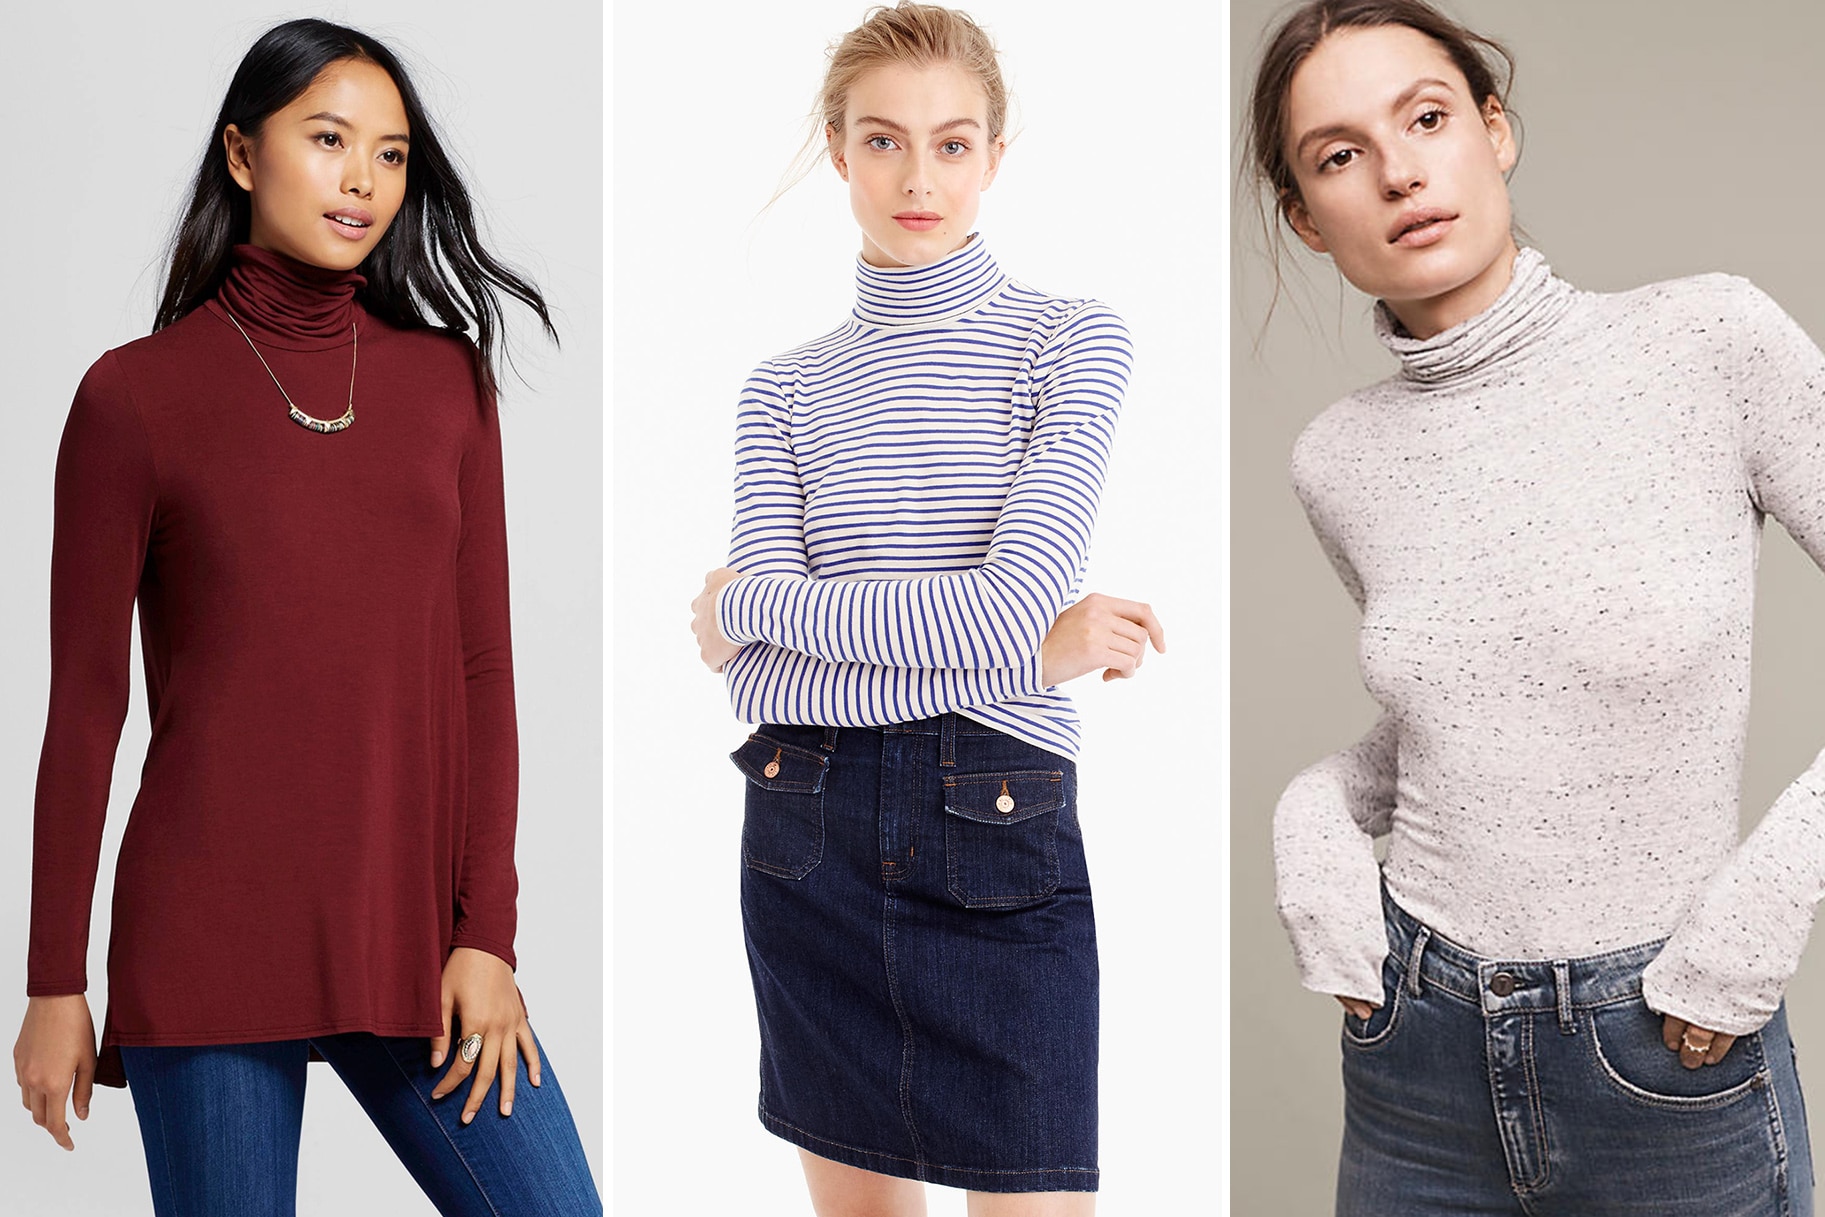 Thin Turtlenecks That are Flattering | The Daily Dish